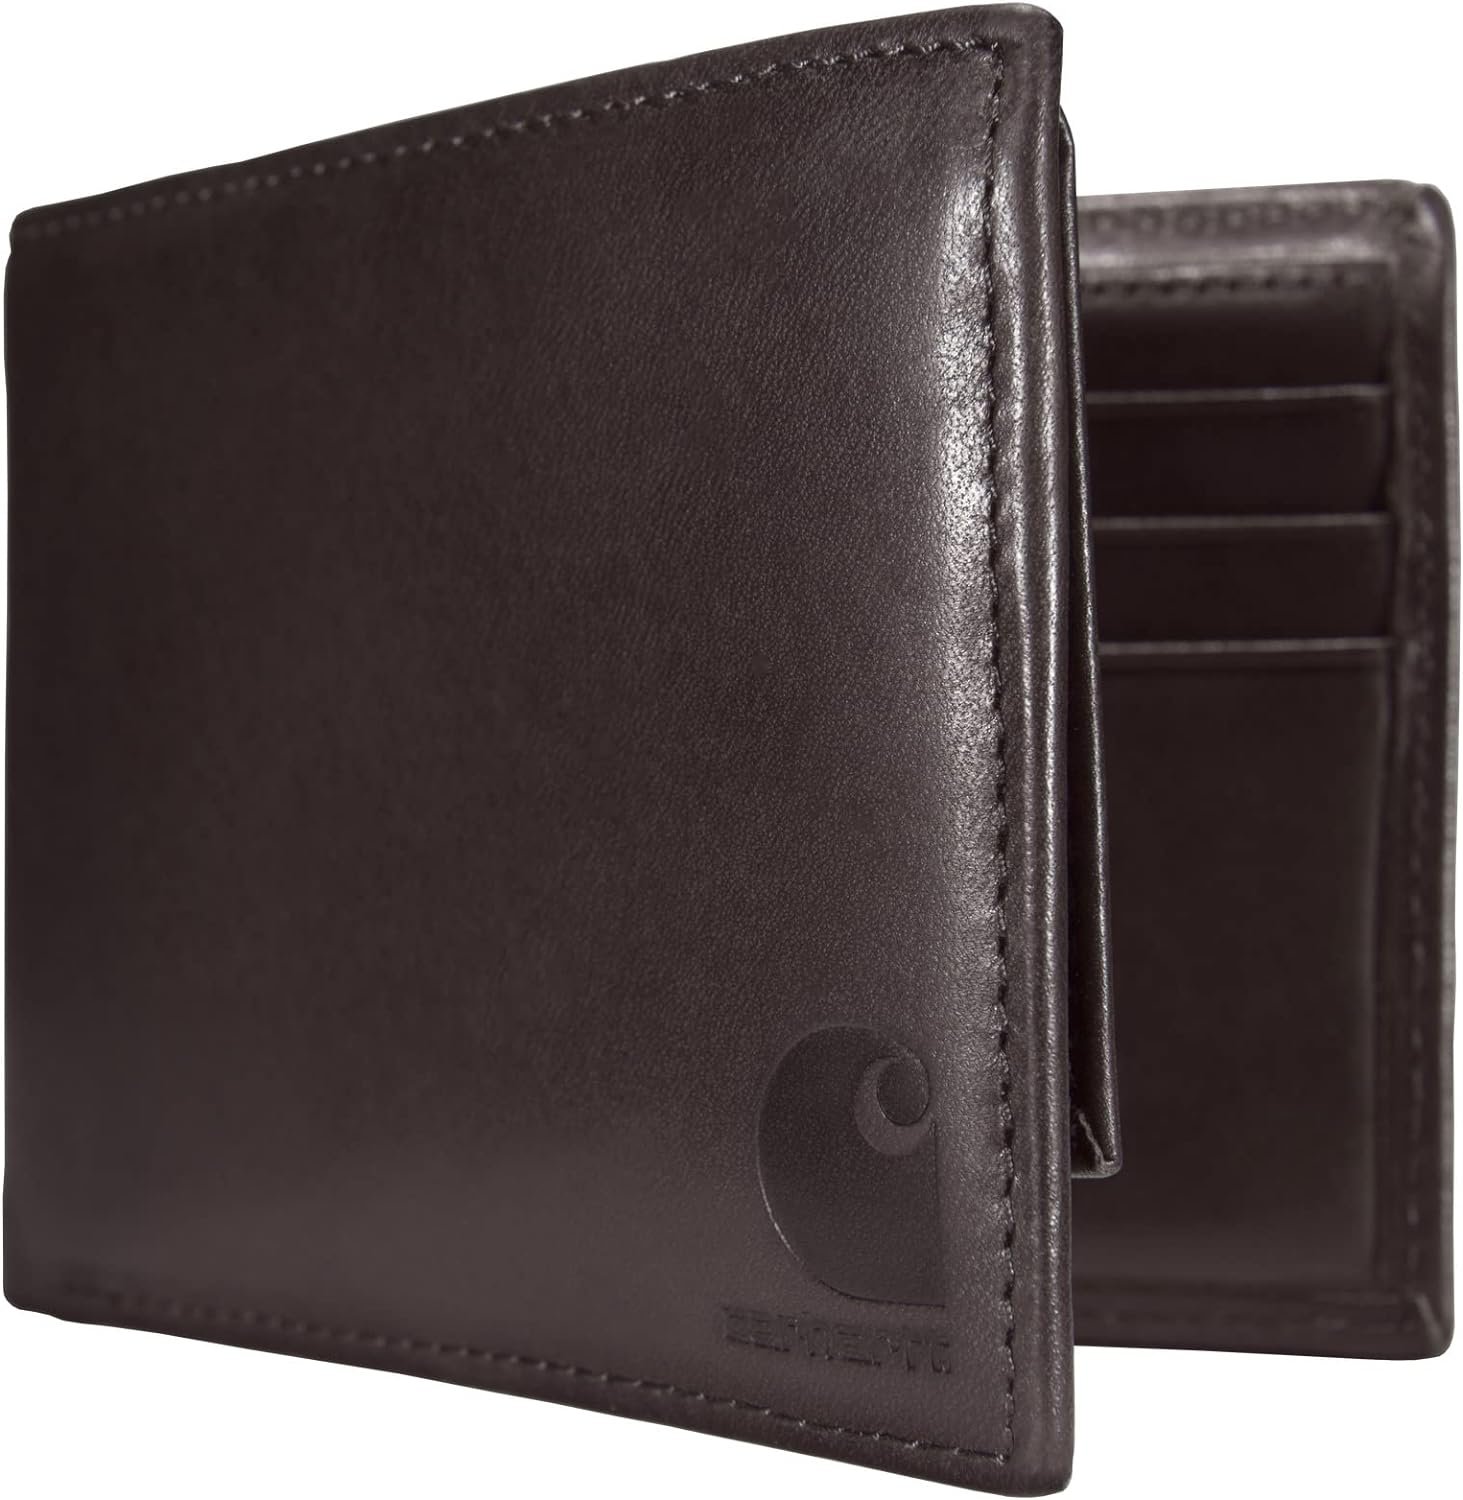 Carhartt Men’s Durable Oil Tan Leather Wallets Review